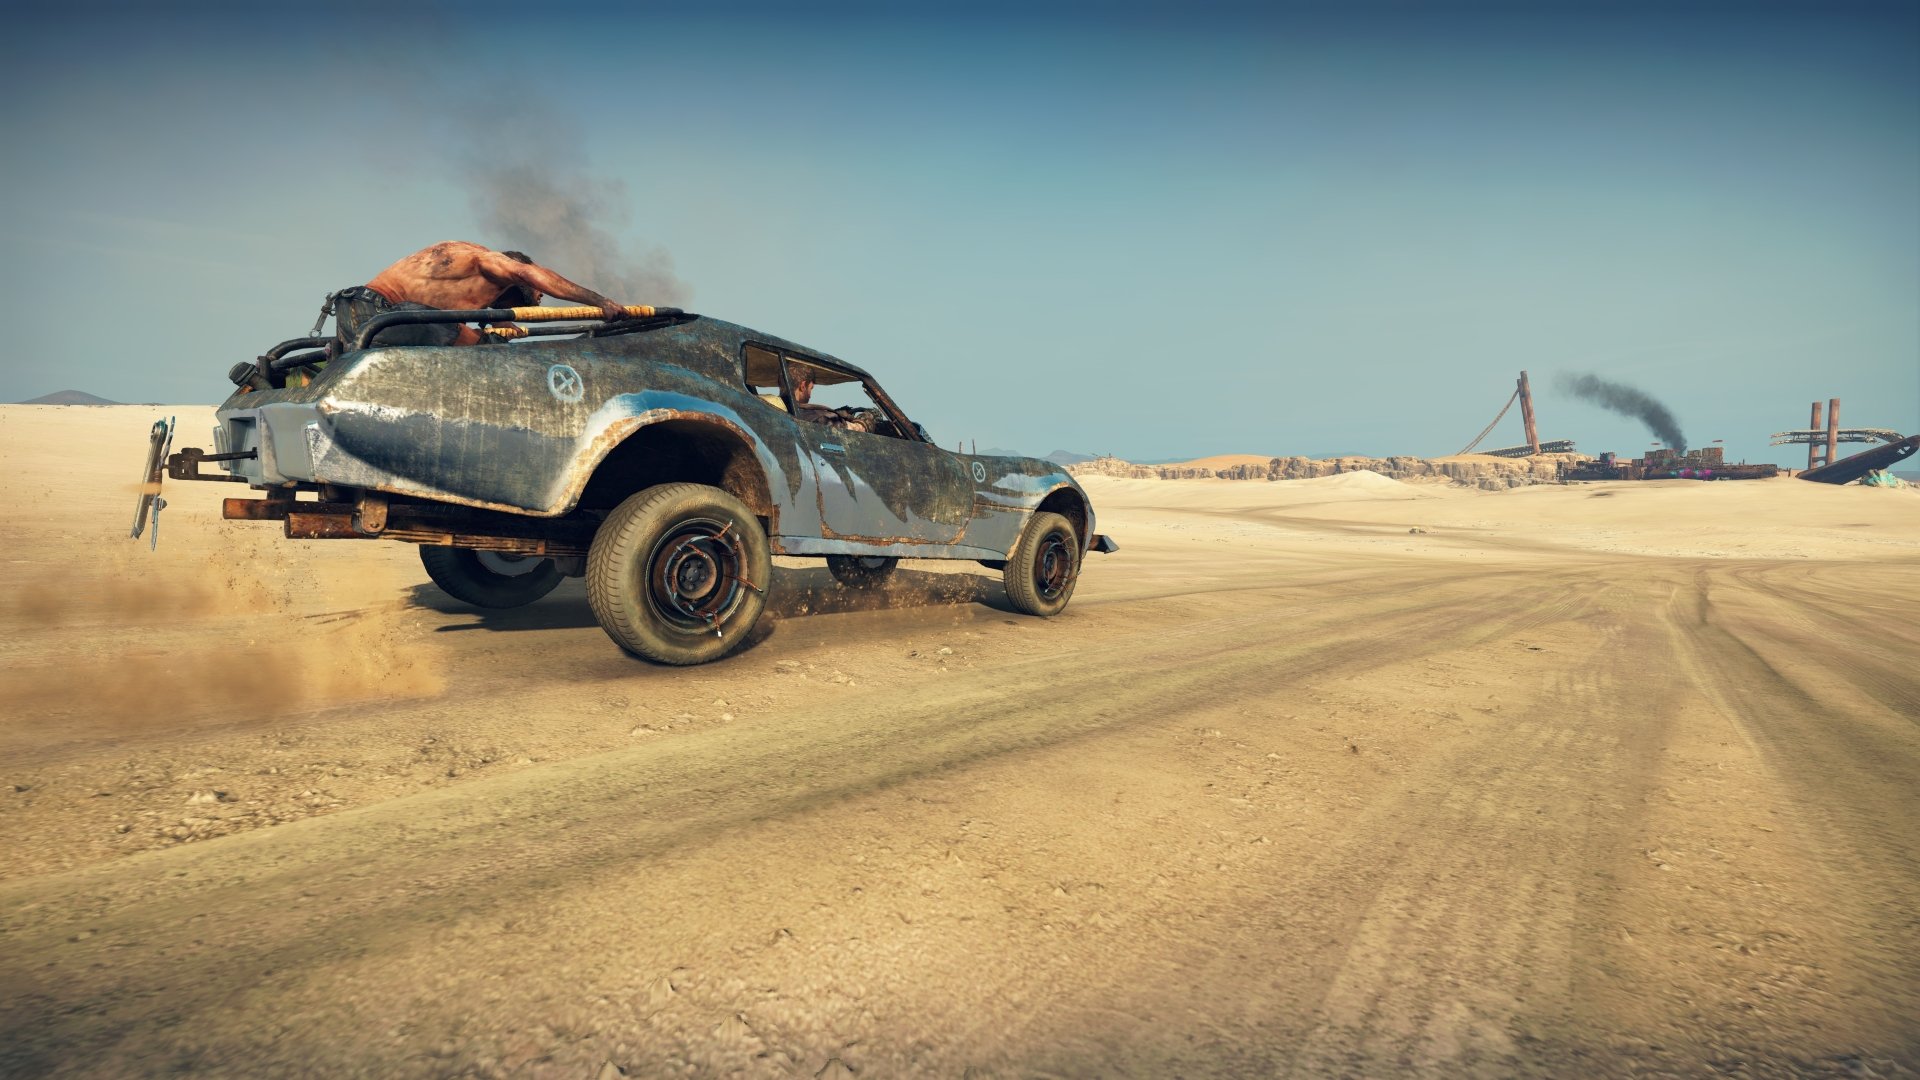 PC Gaming Video Games Mad Max Game Desert Apocalyptic Car Mad Max Screen Shot 1920x1080